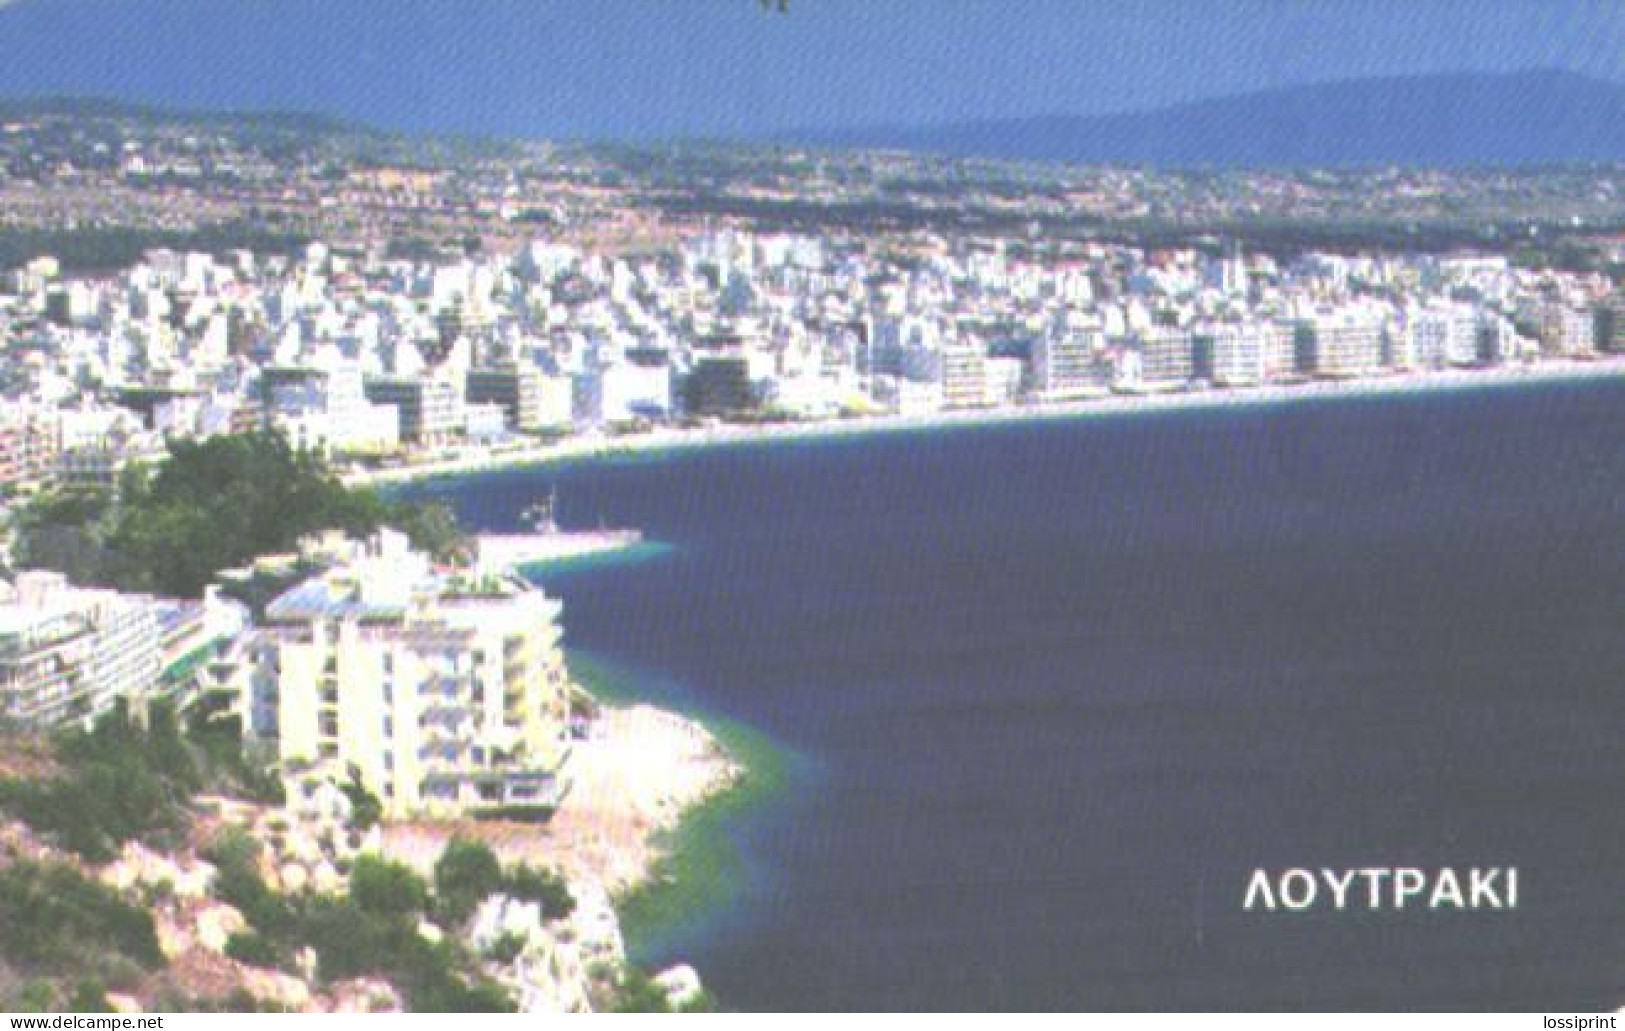 Greece:Used Phonecard, OTE, 100 Units, Hpaioy Lighthouse, Loytpaki Aerial View, 1996 - Vuurtorens